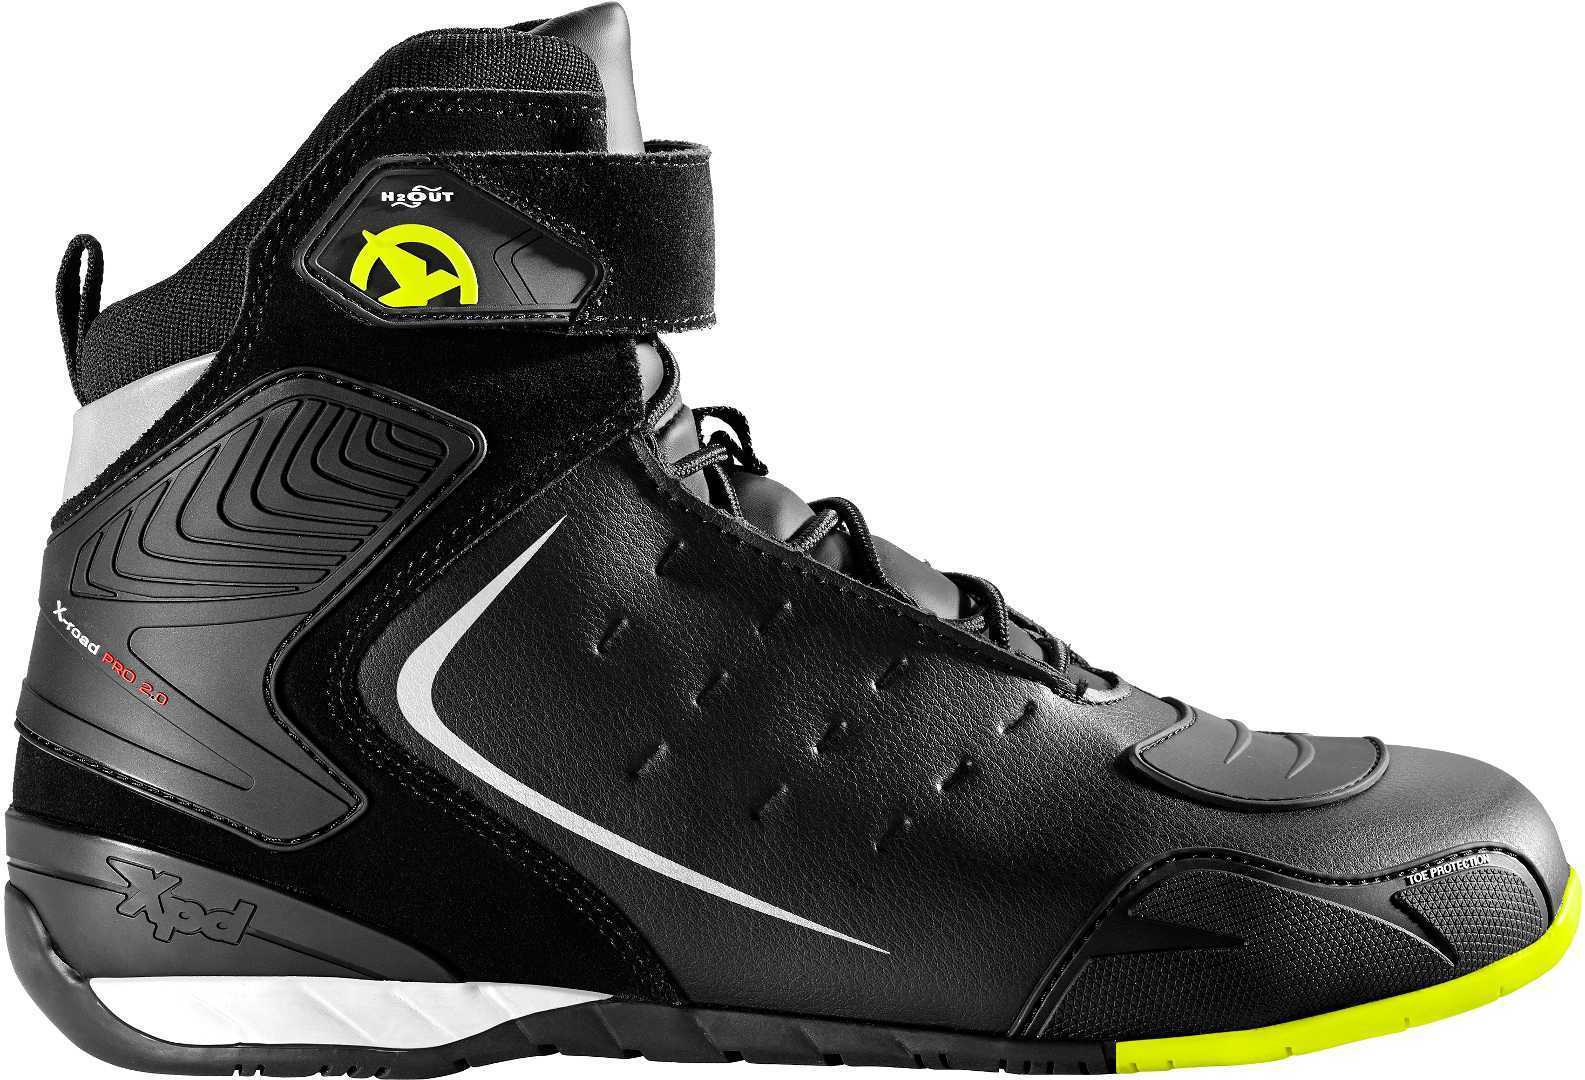 Image of XPD X-Road H2Out Yellow Fluo Size 39 EN